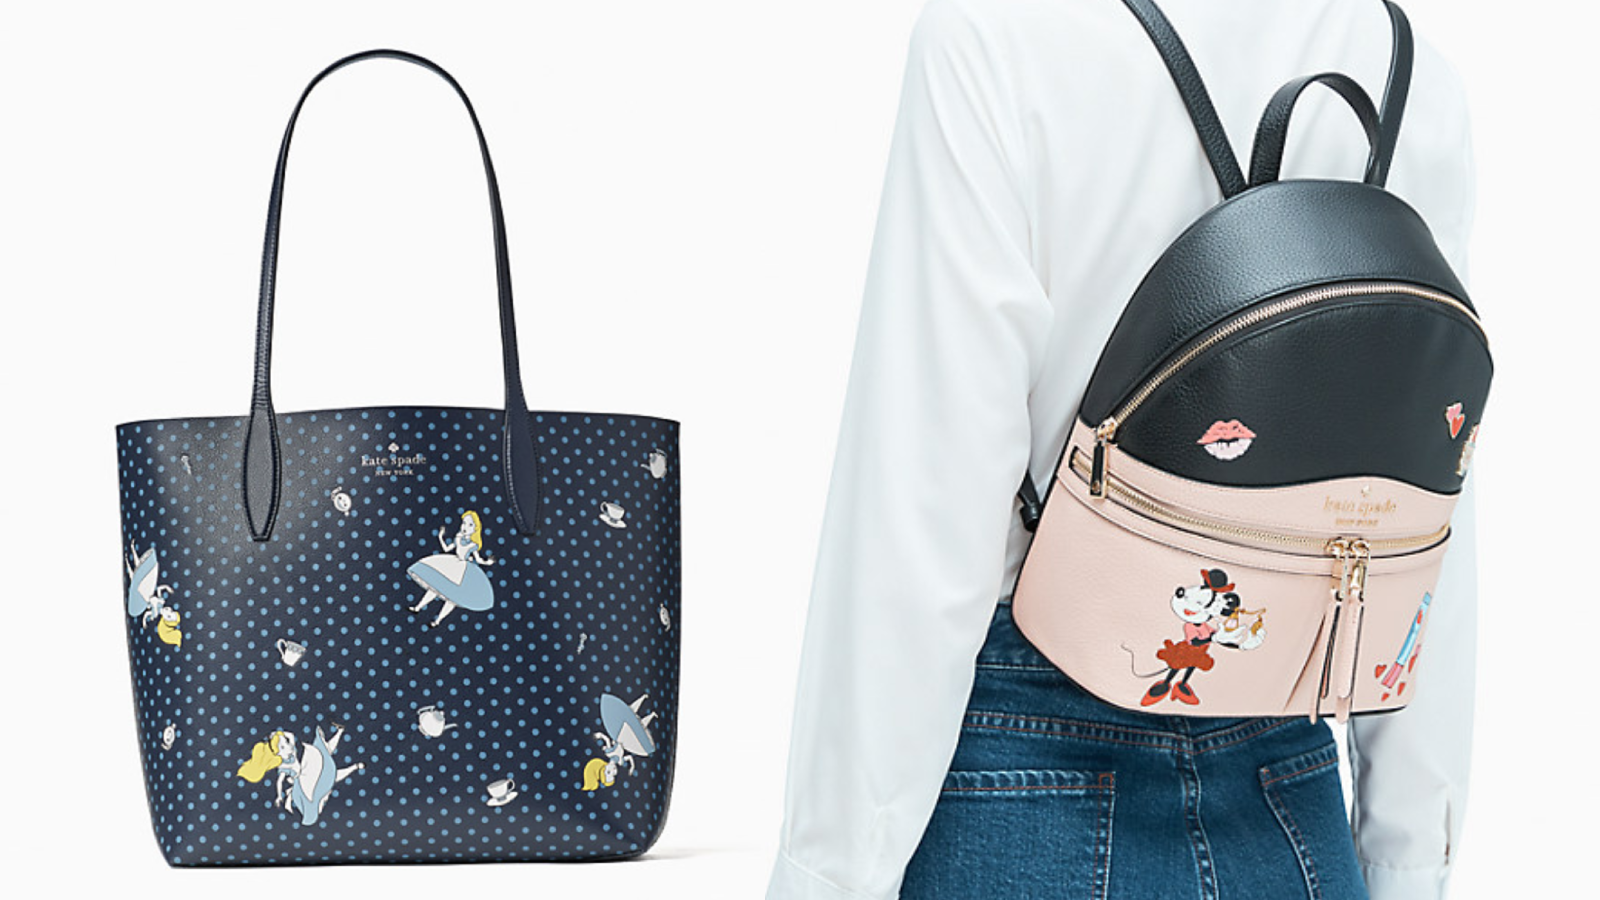 Disney X Kate Spade Collection Where To Buy The Purses And Accessories